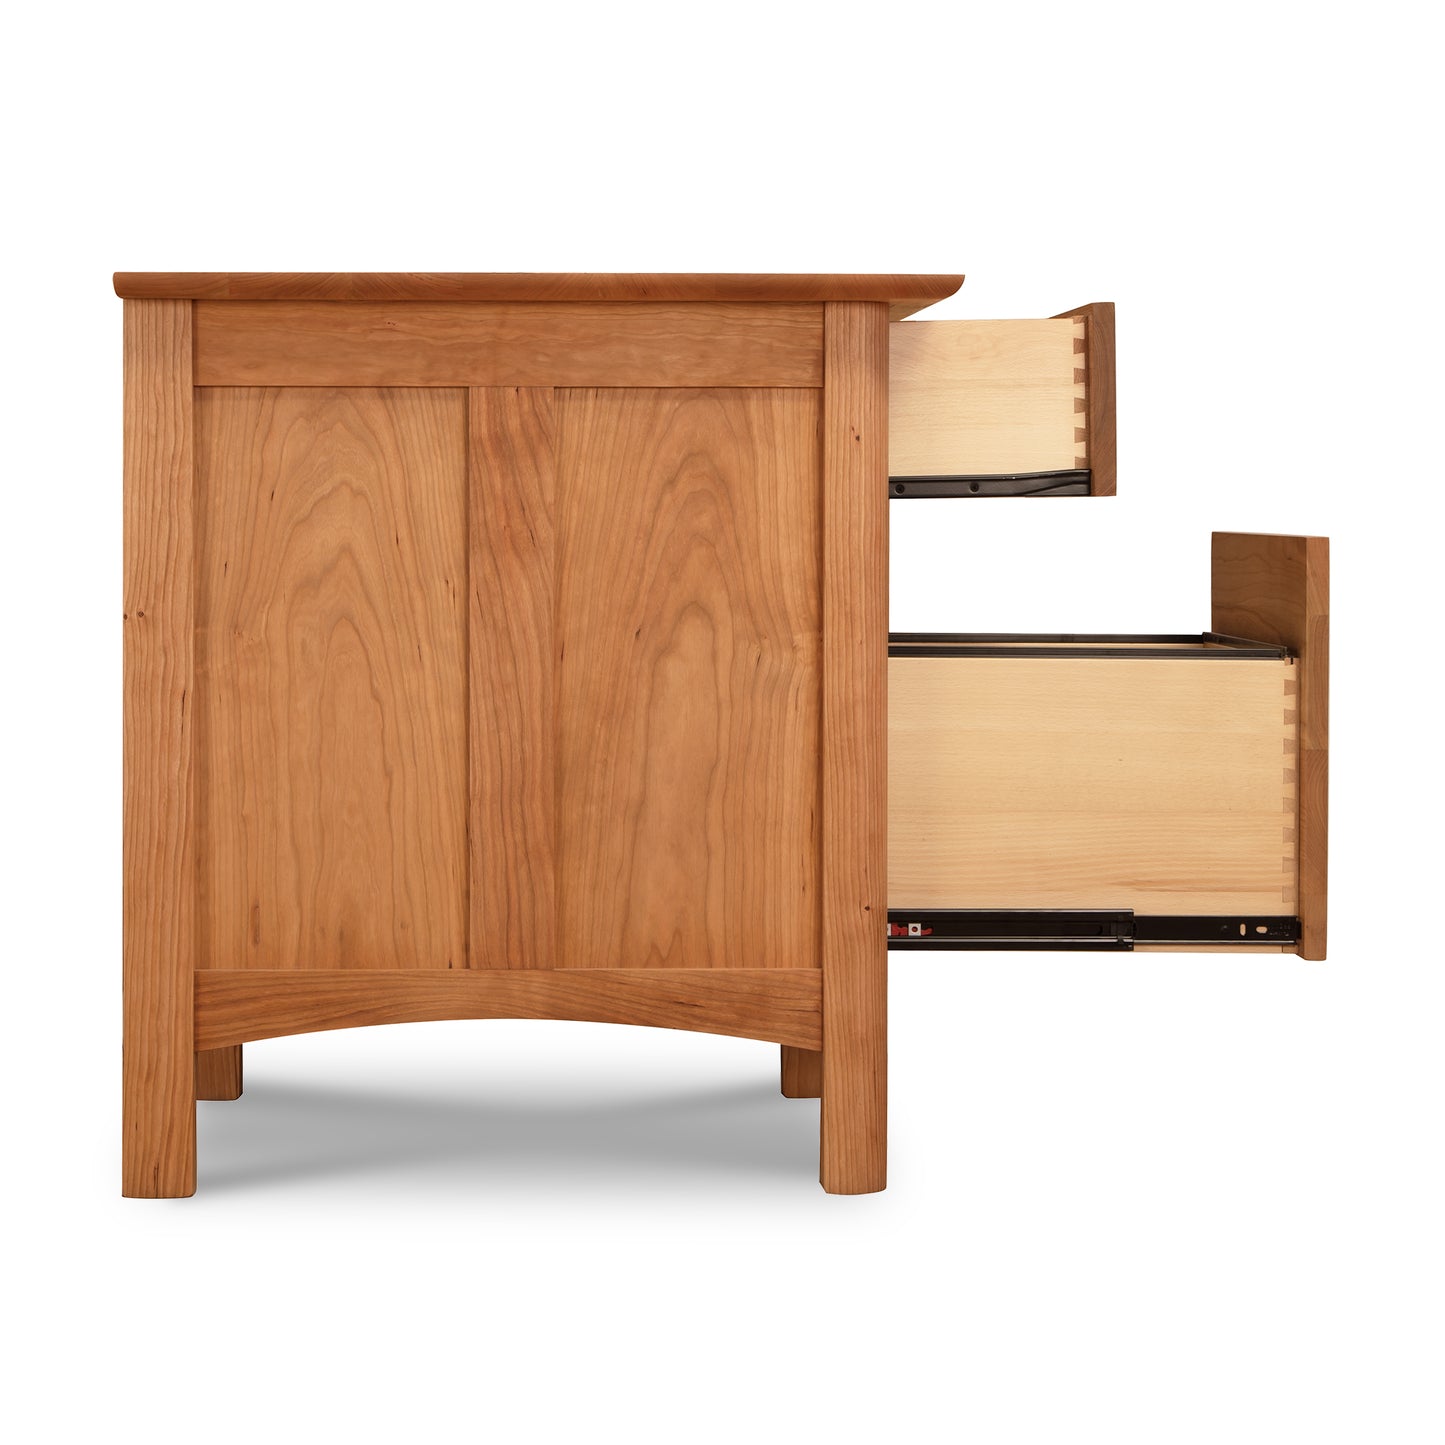 Sentence with replaced product:
Heartwood Shaker Vertical File Cabinet from Vermont Furniture Designs, crafted from sustainably harvested North American hardwoods and featuring an eco-friendly oil finish, isolated on a white background.